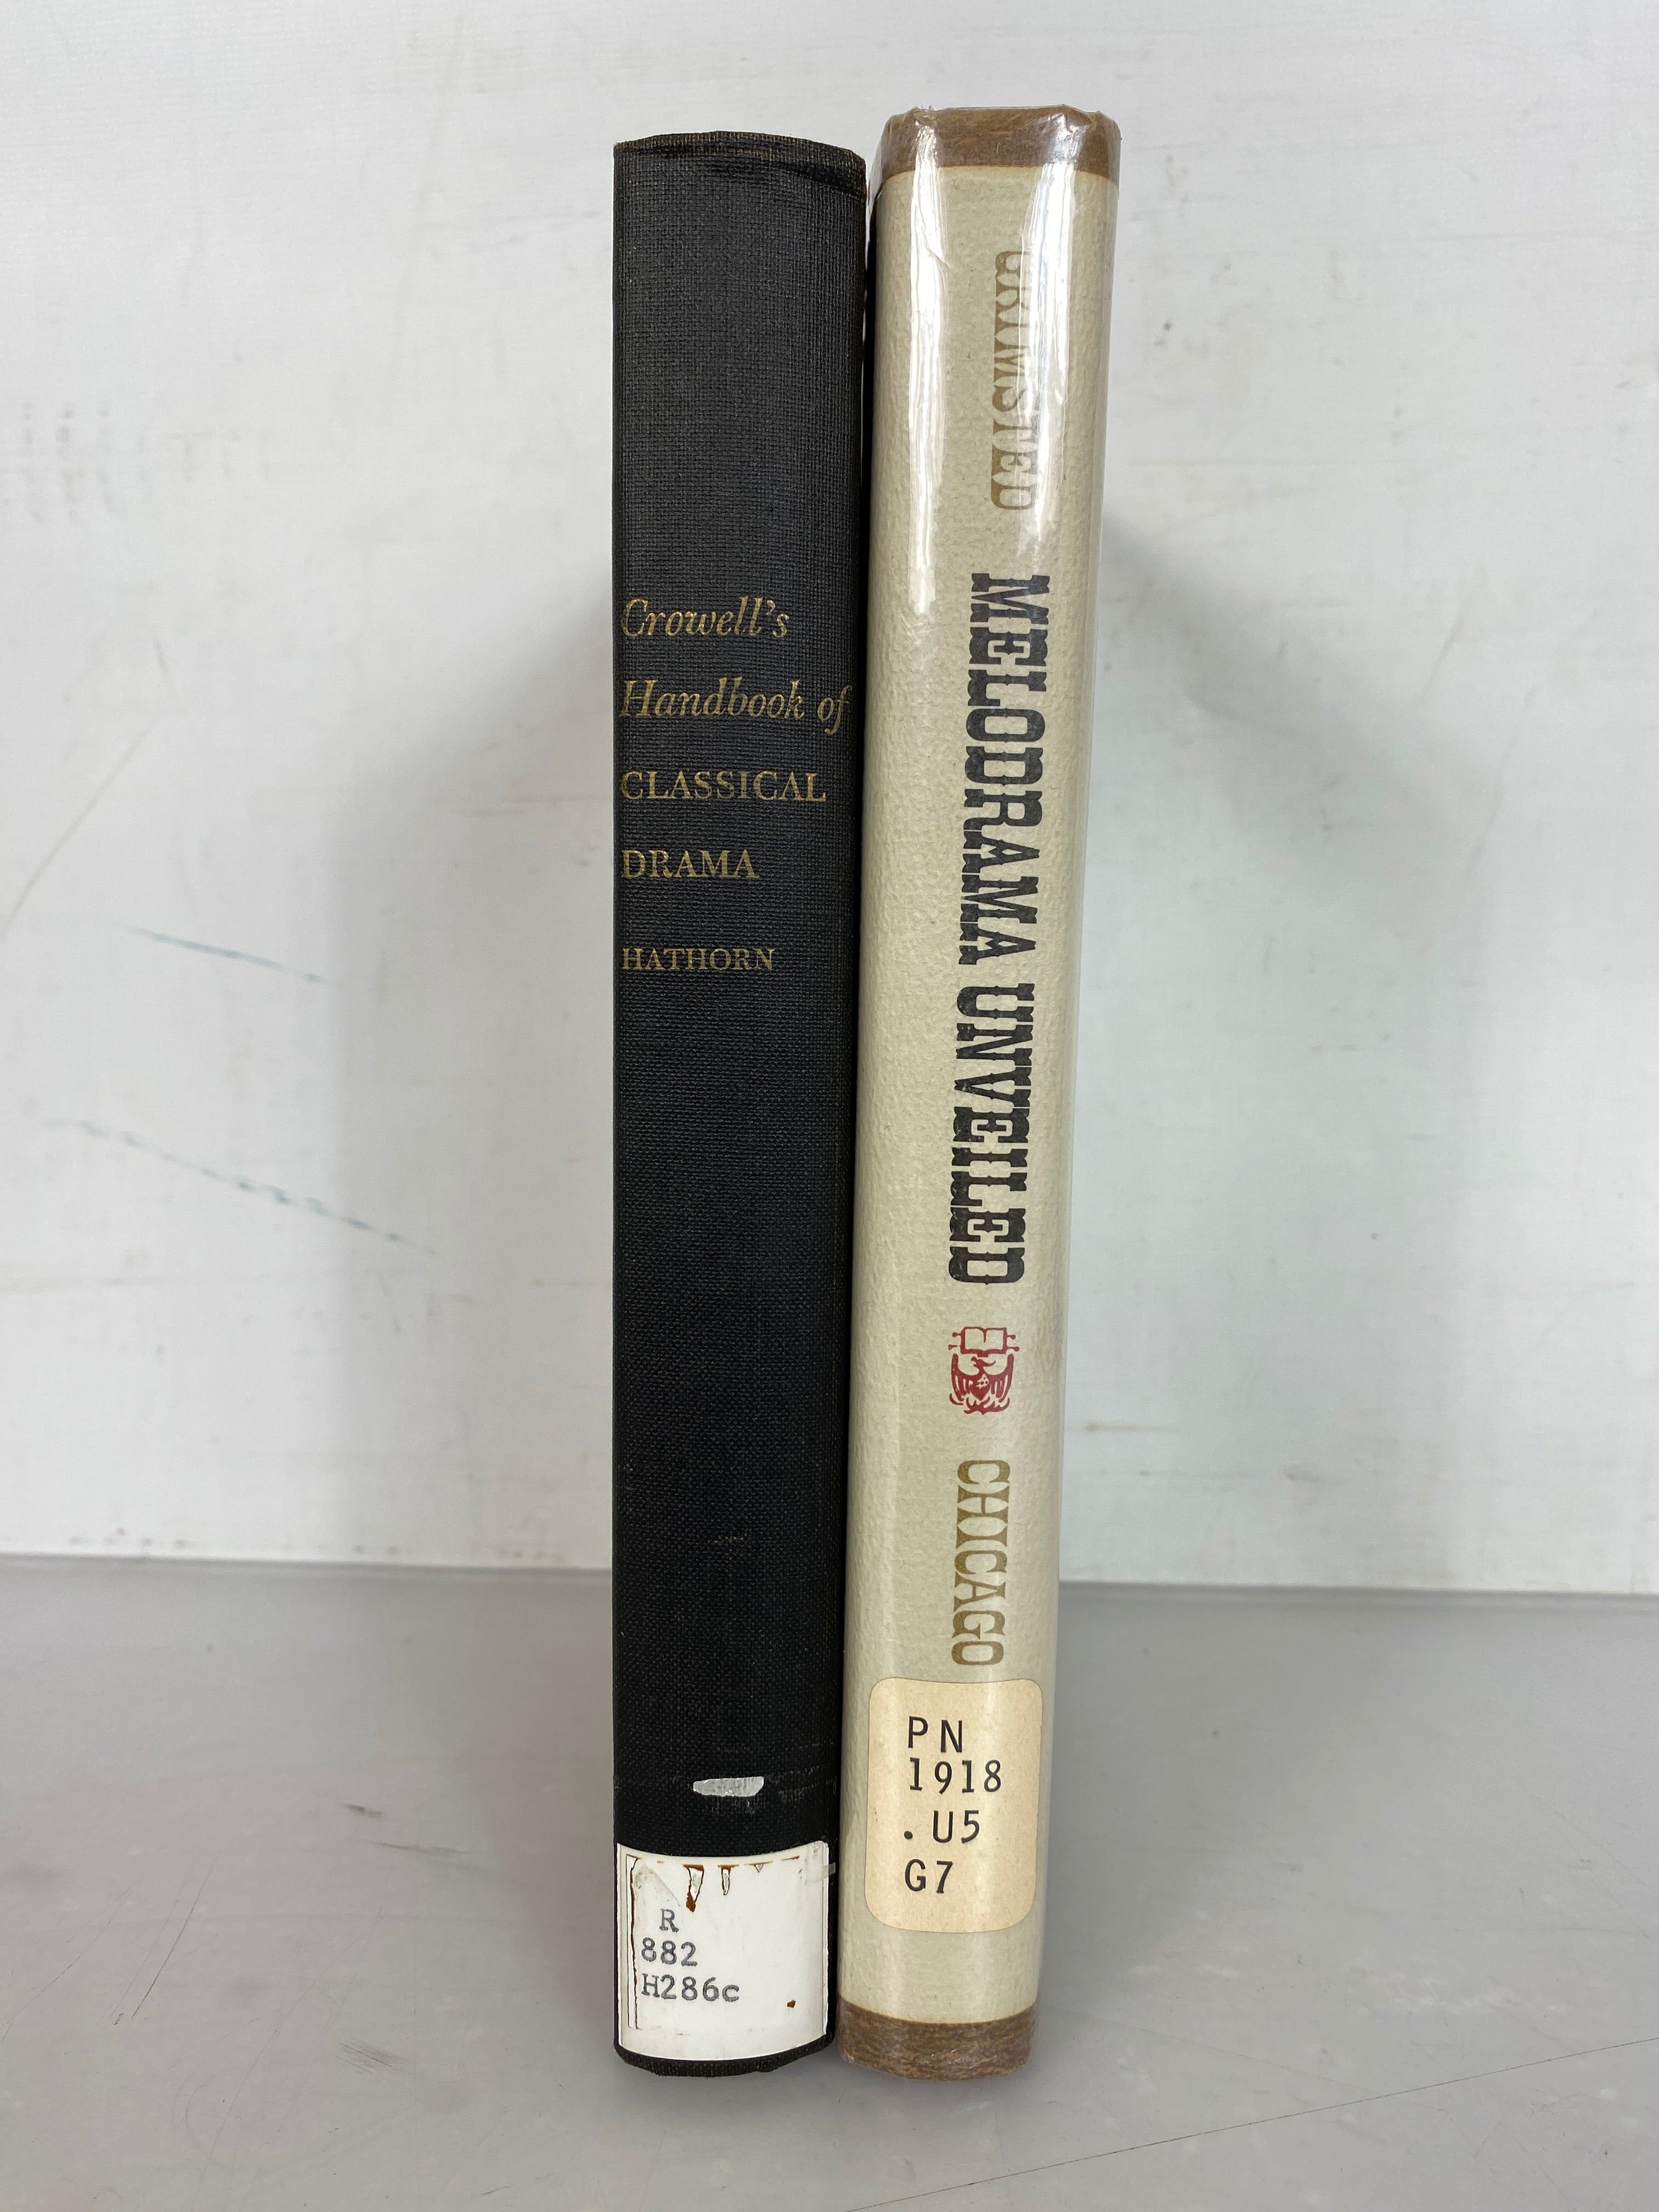 Lot of 2: Crowell's Handbook of Classical Drama 1967/Melodrama Unveiled 1968 HC